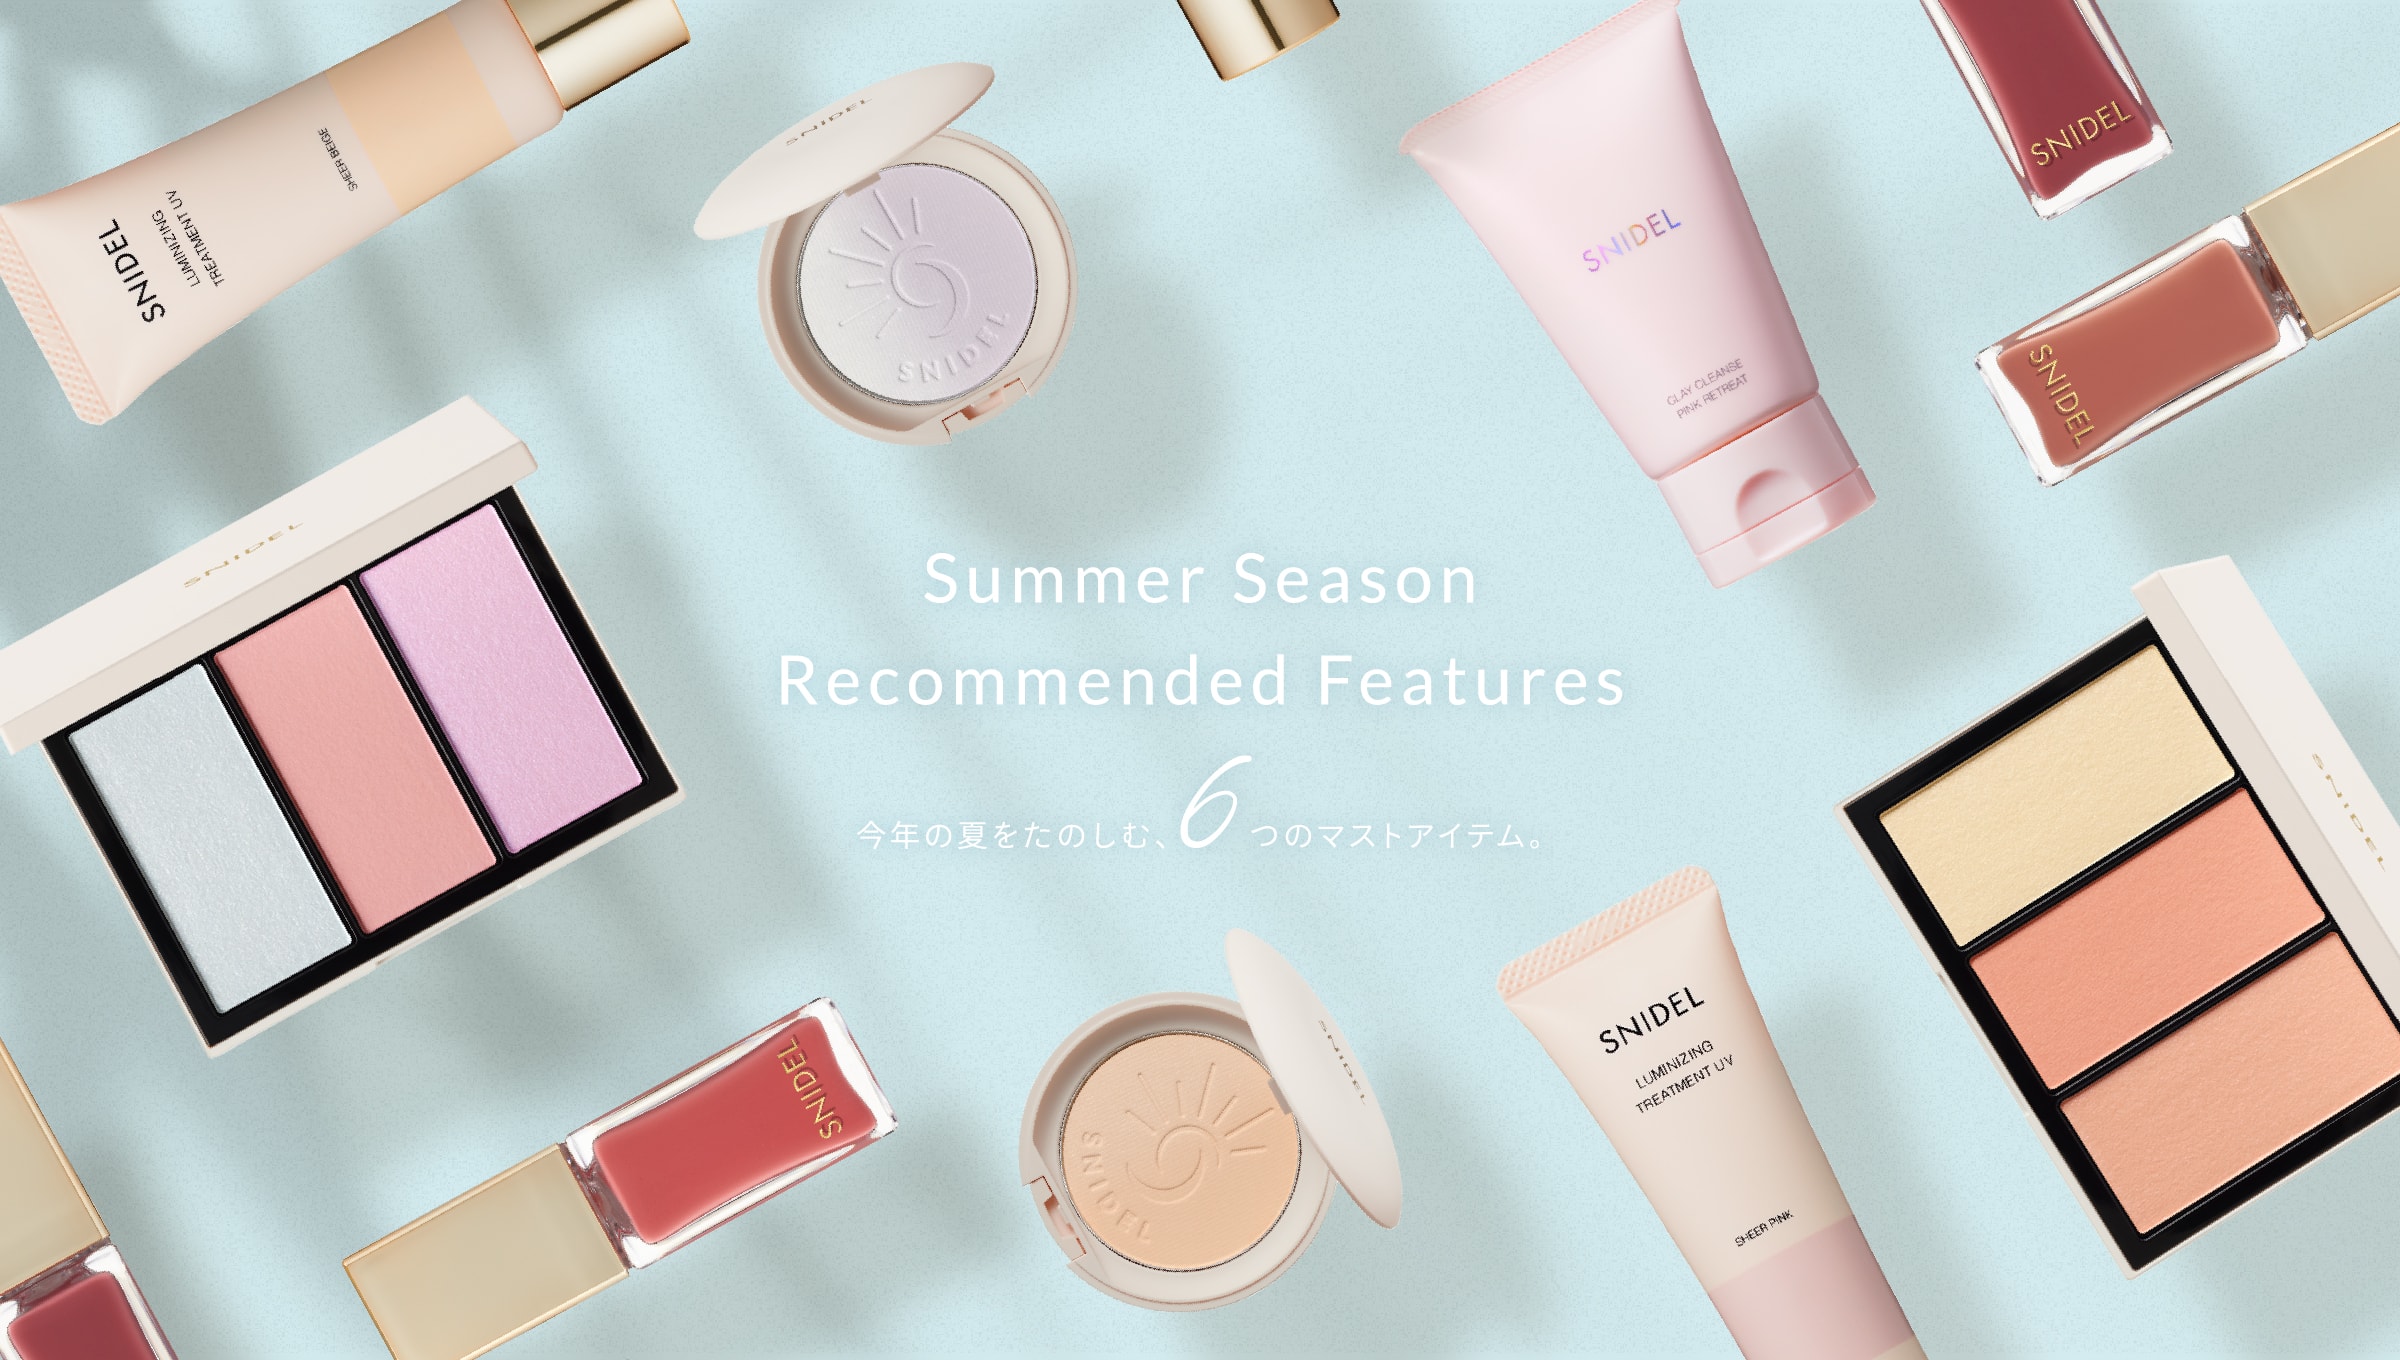 Summer Season Recommended Features 今年の夏をたのしむ、6つのマストアイテム。